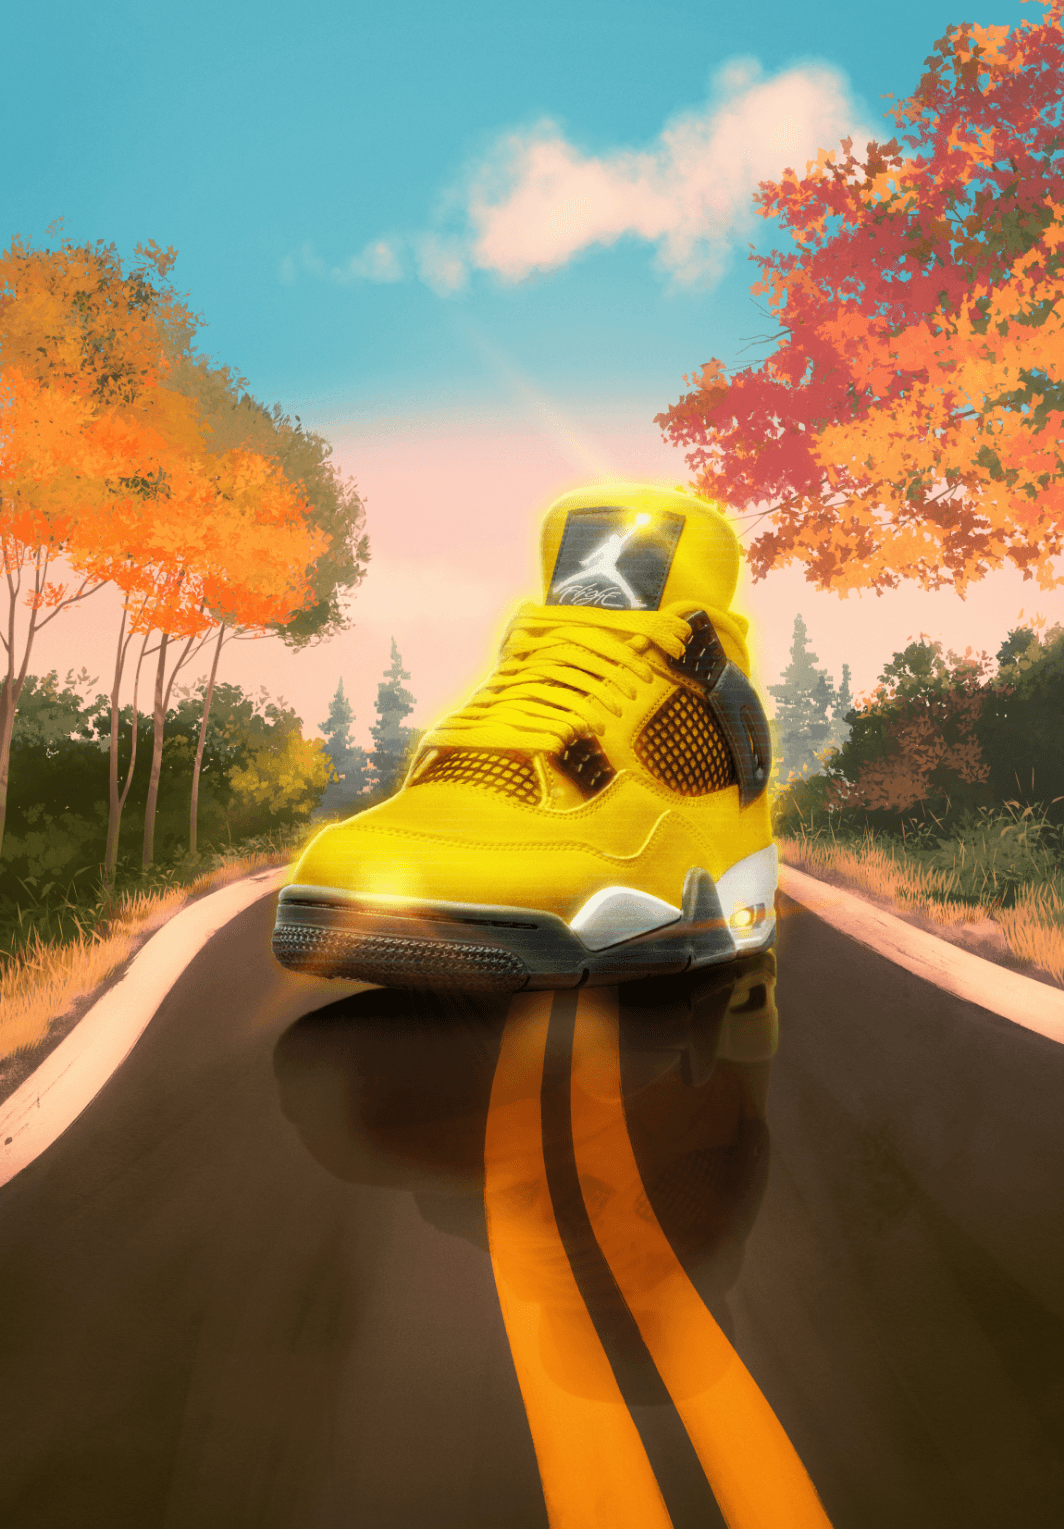 Yellow Jordan 4s rendered on a street with double yellow center line